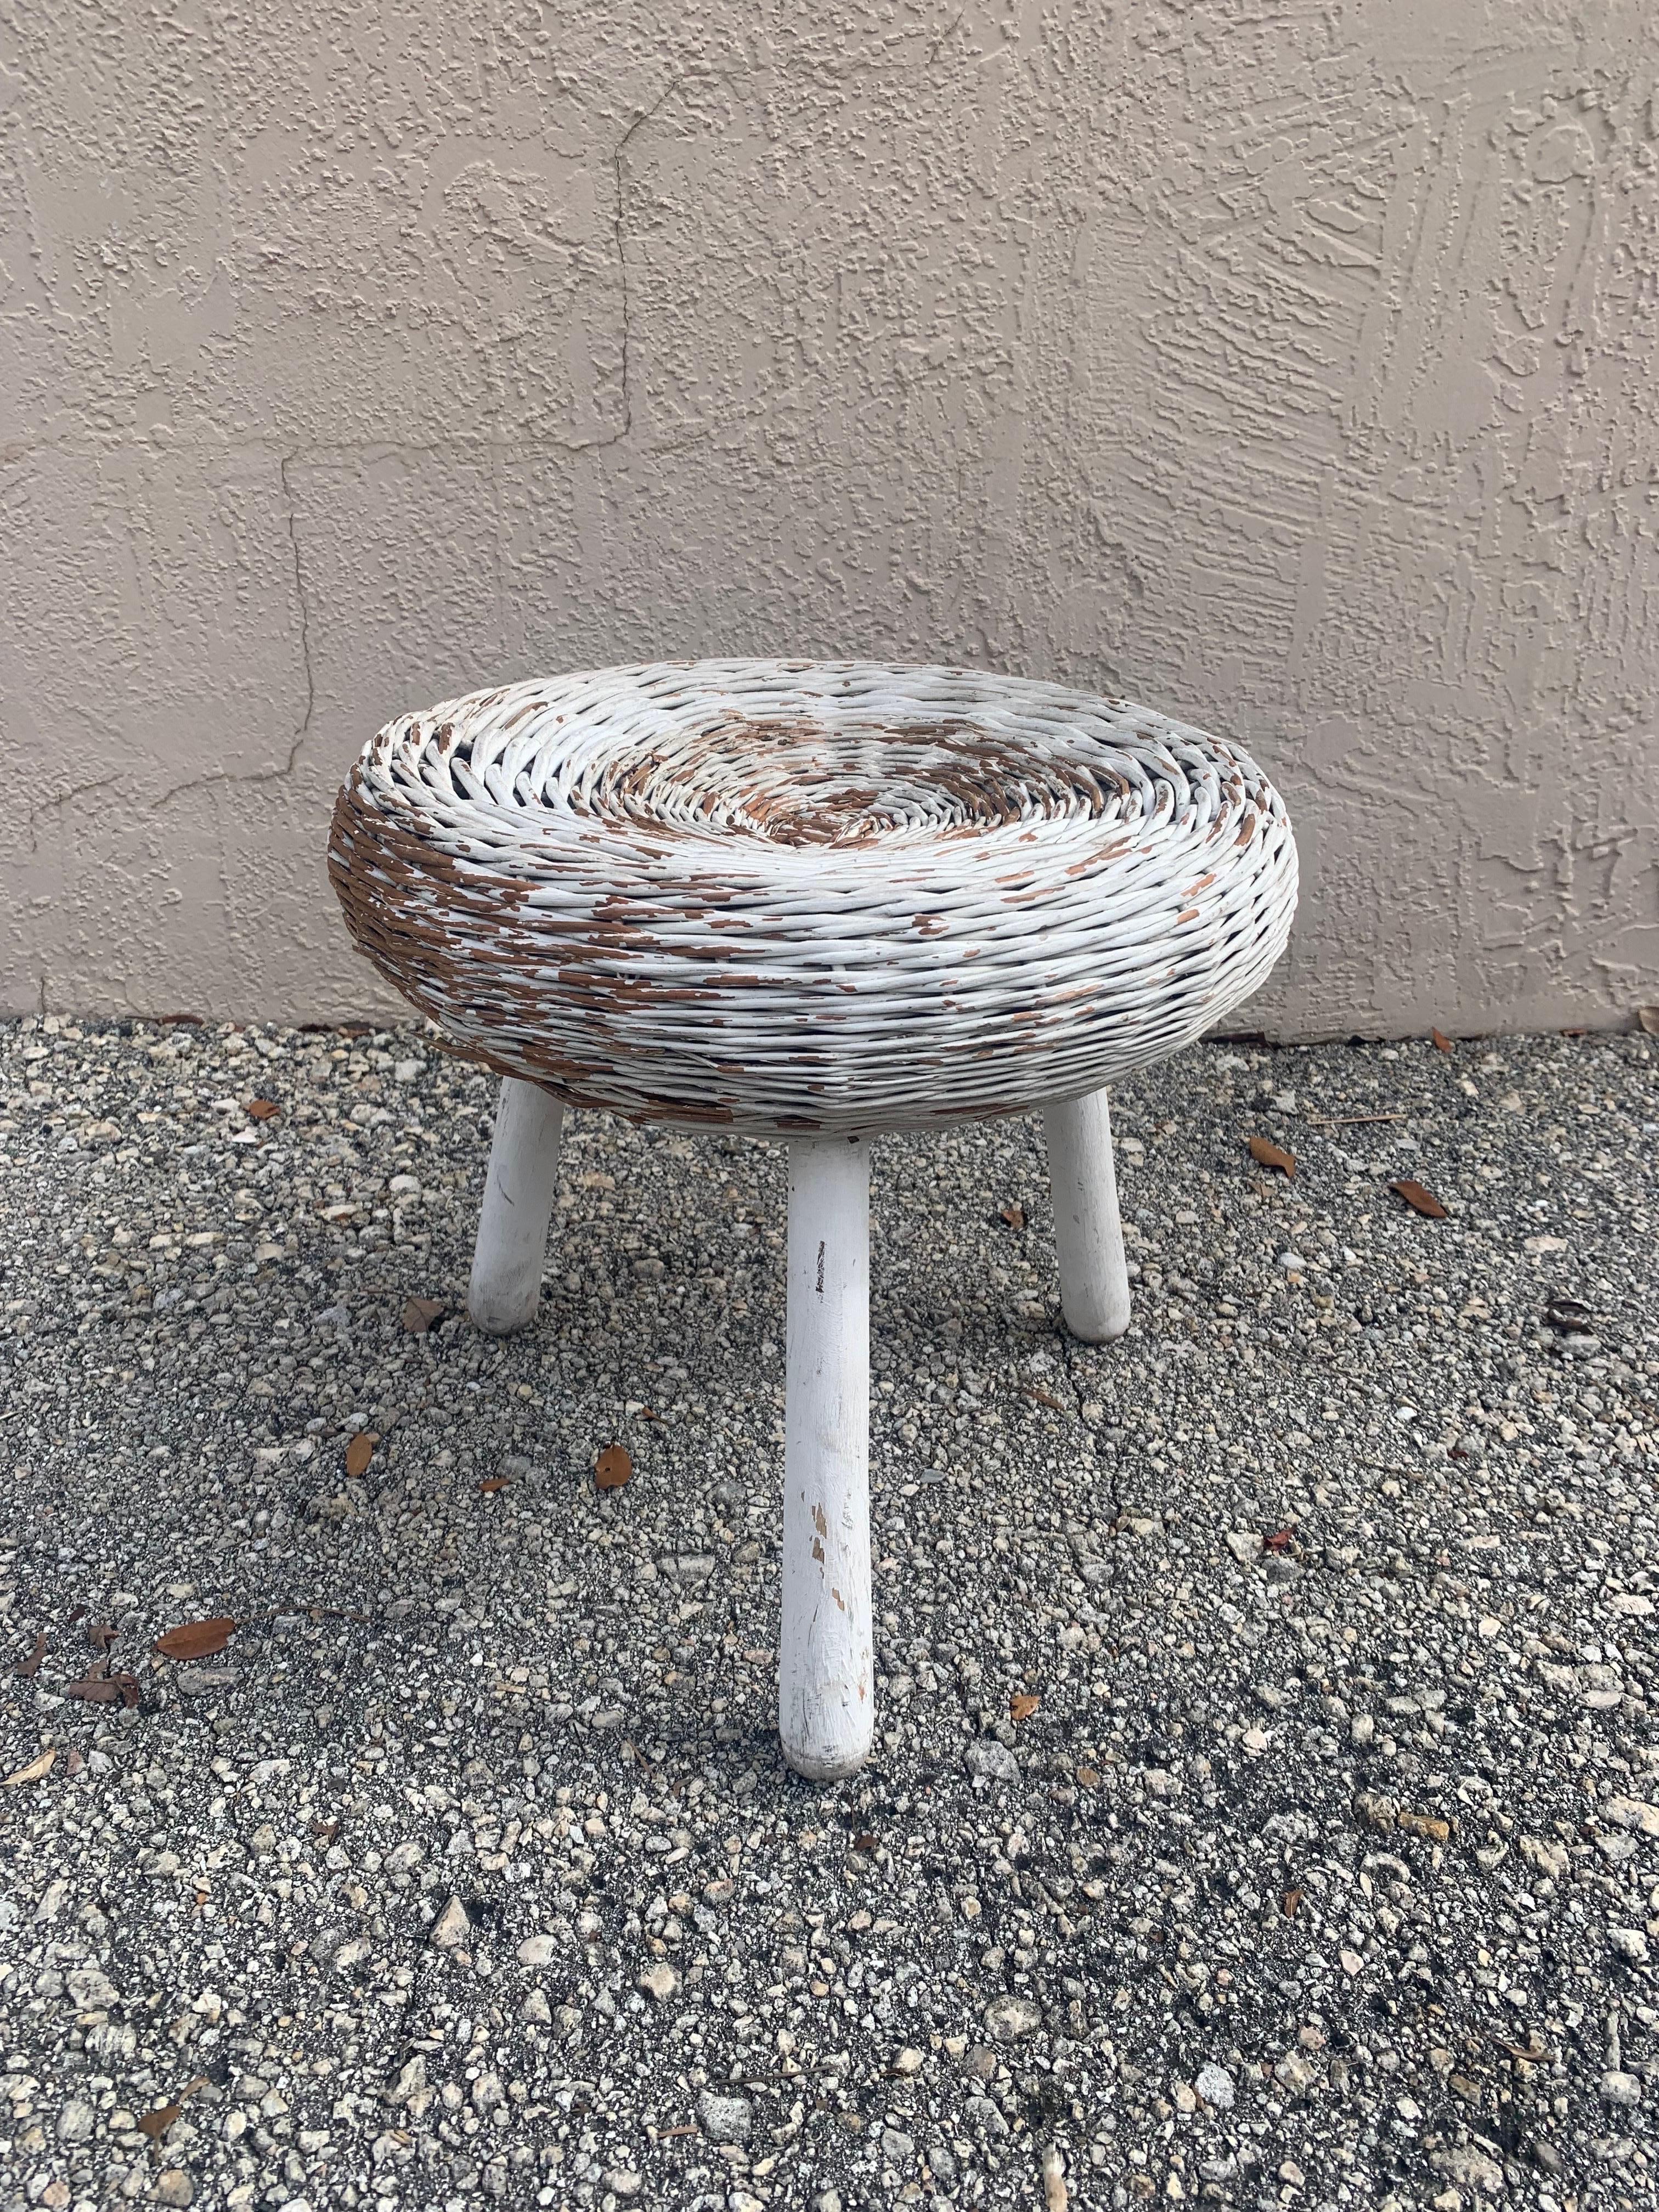 Mid-Century Modern vintage organic stool made from woven rattan and solid wood. Attributed to Tony Paul and made in the United States 1950s. 

Conical legs of solid wood support the wicker top. The piece has been painted white years and years ago